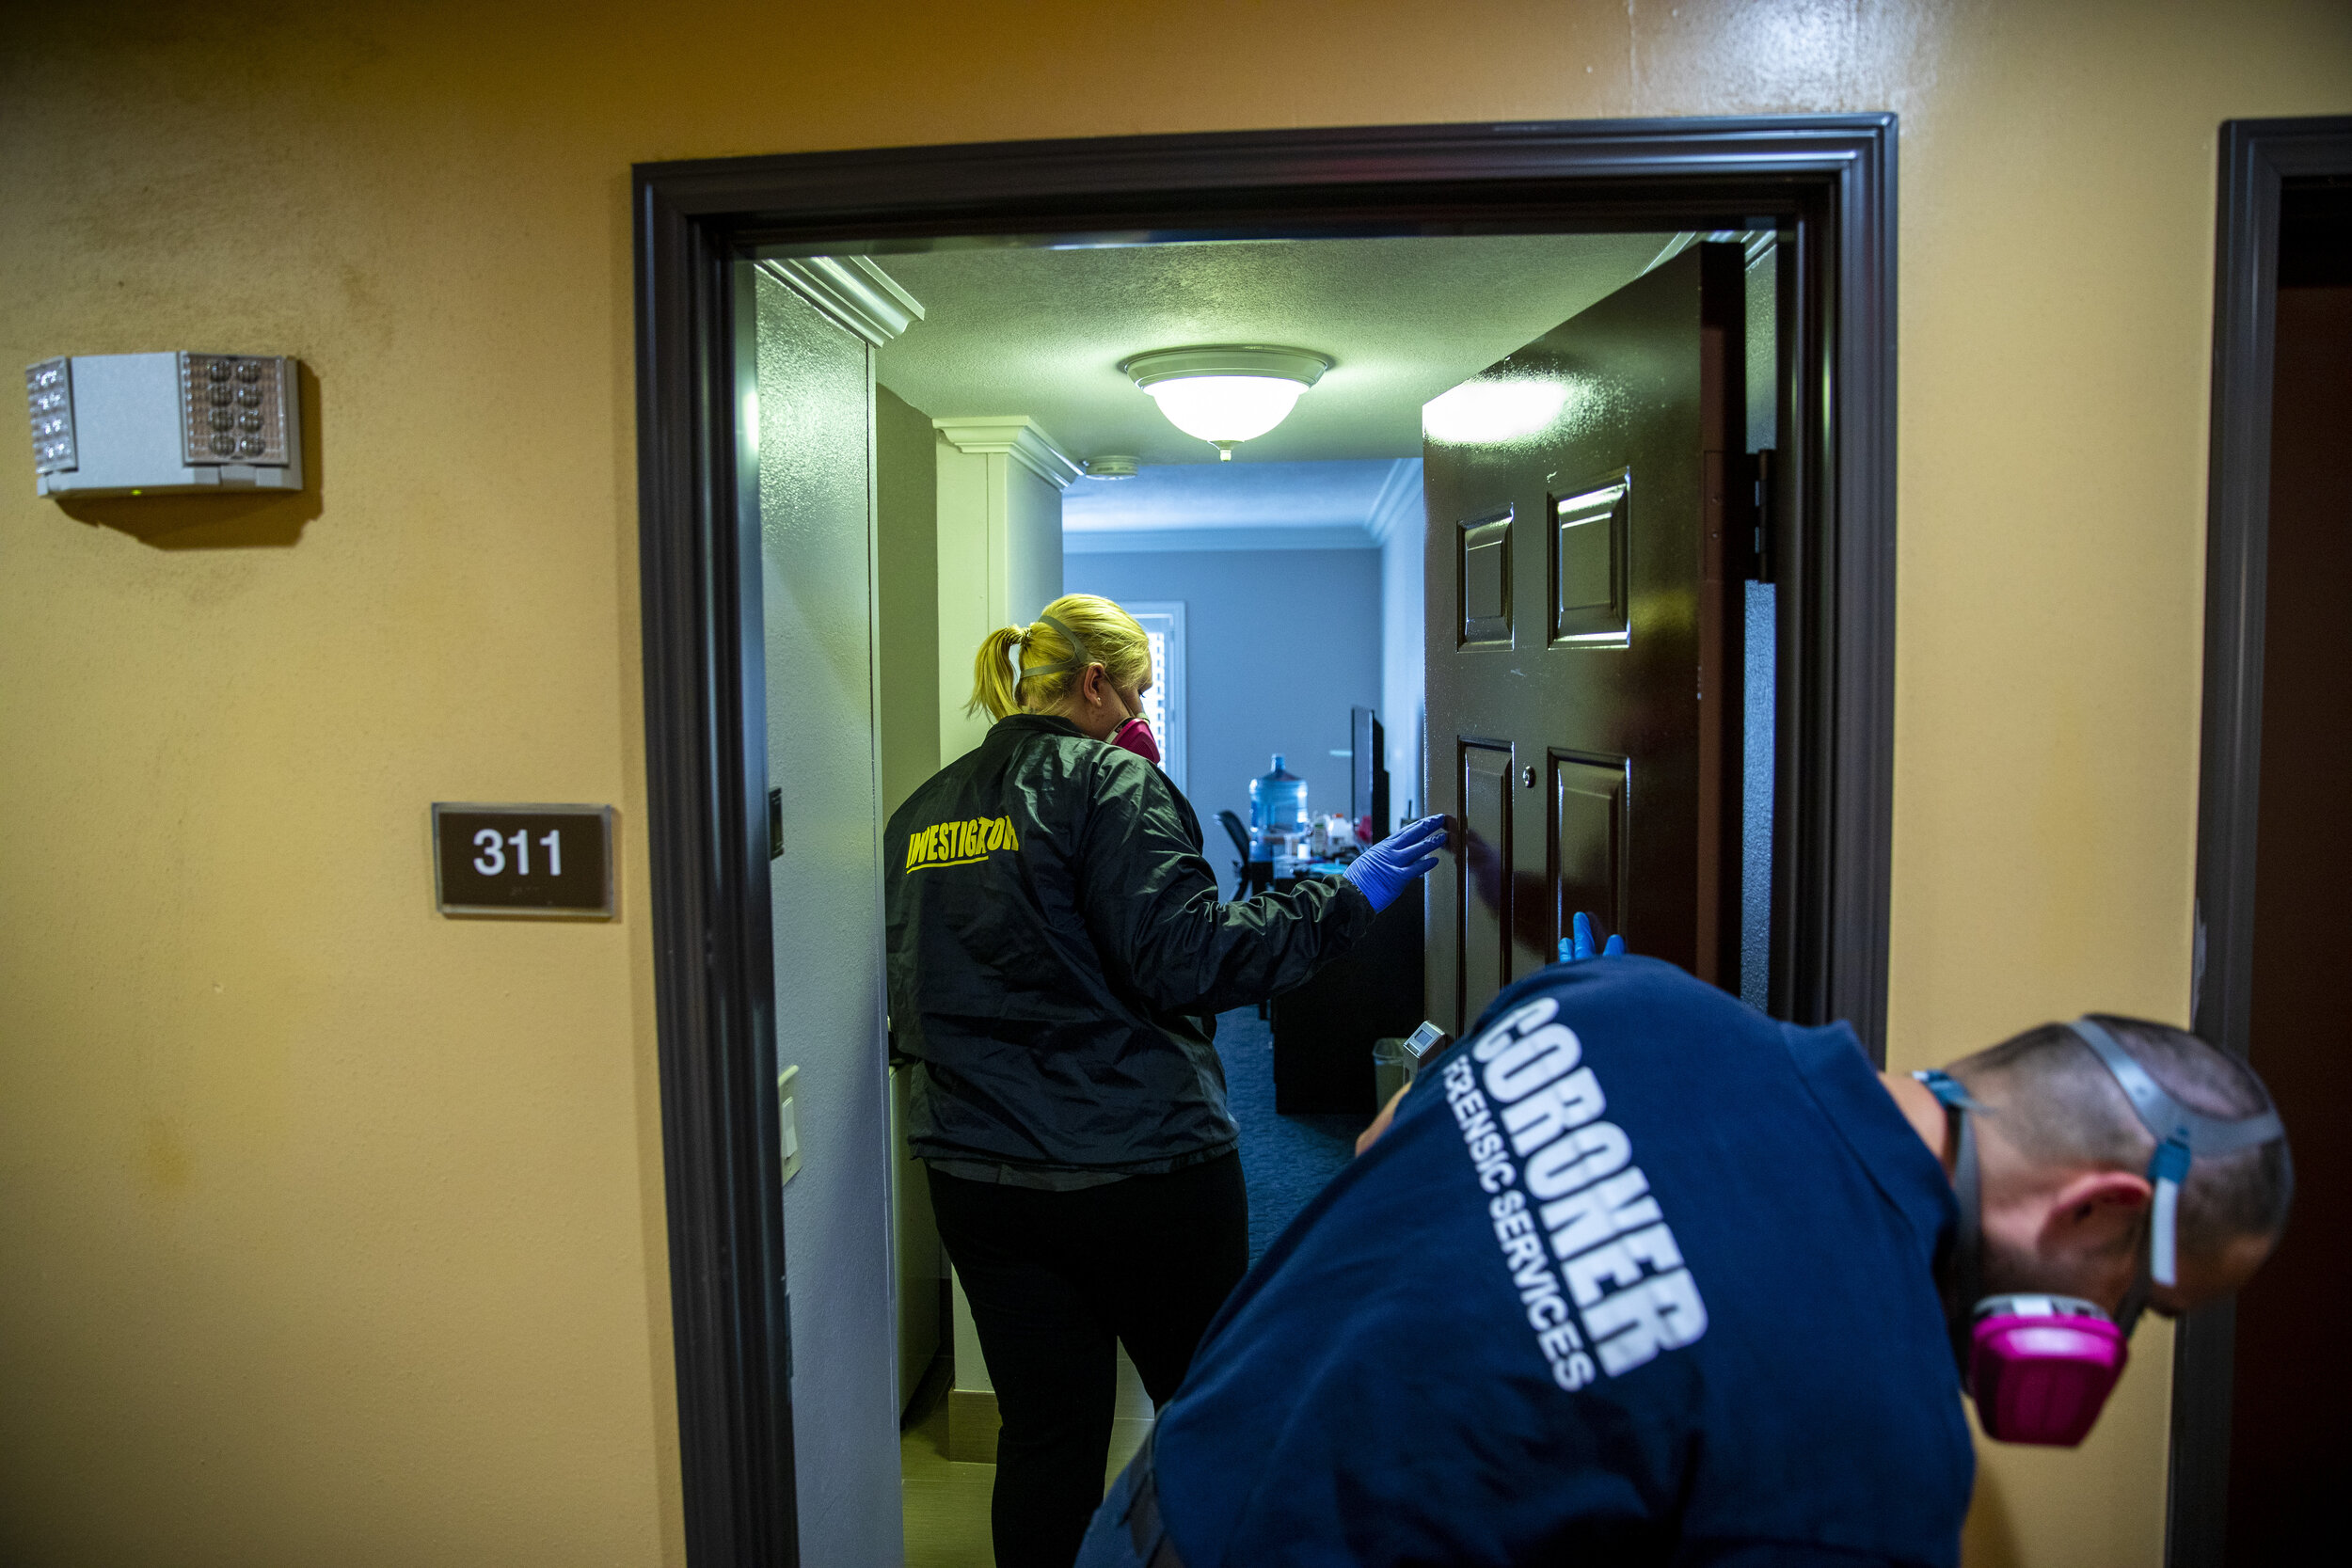  Kristina McGuire, an investigator with the Los Angeles County Dept. of Medical Examiner-Coroner enters a room at the Days Inn by Wyndham, in West Covina, with Jerry Meza, forensic attendant, where they recovered the lifeless body of Judy Bounthong, 